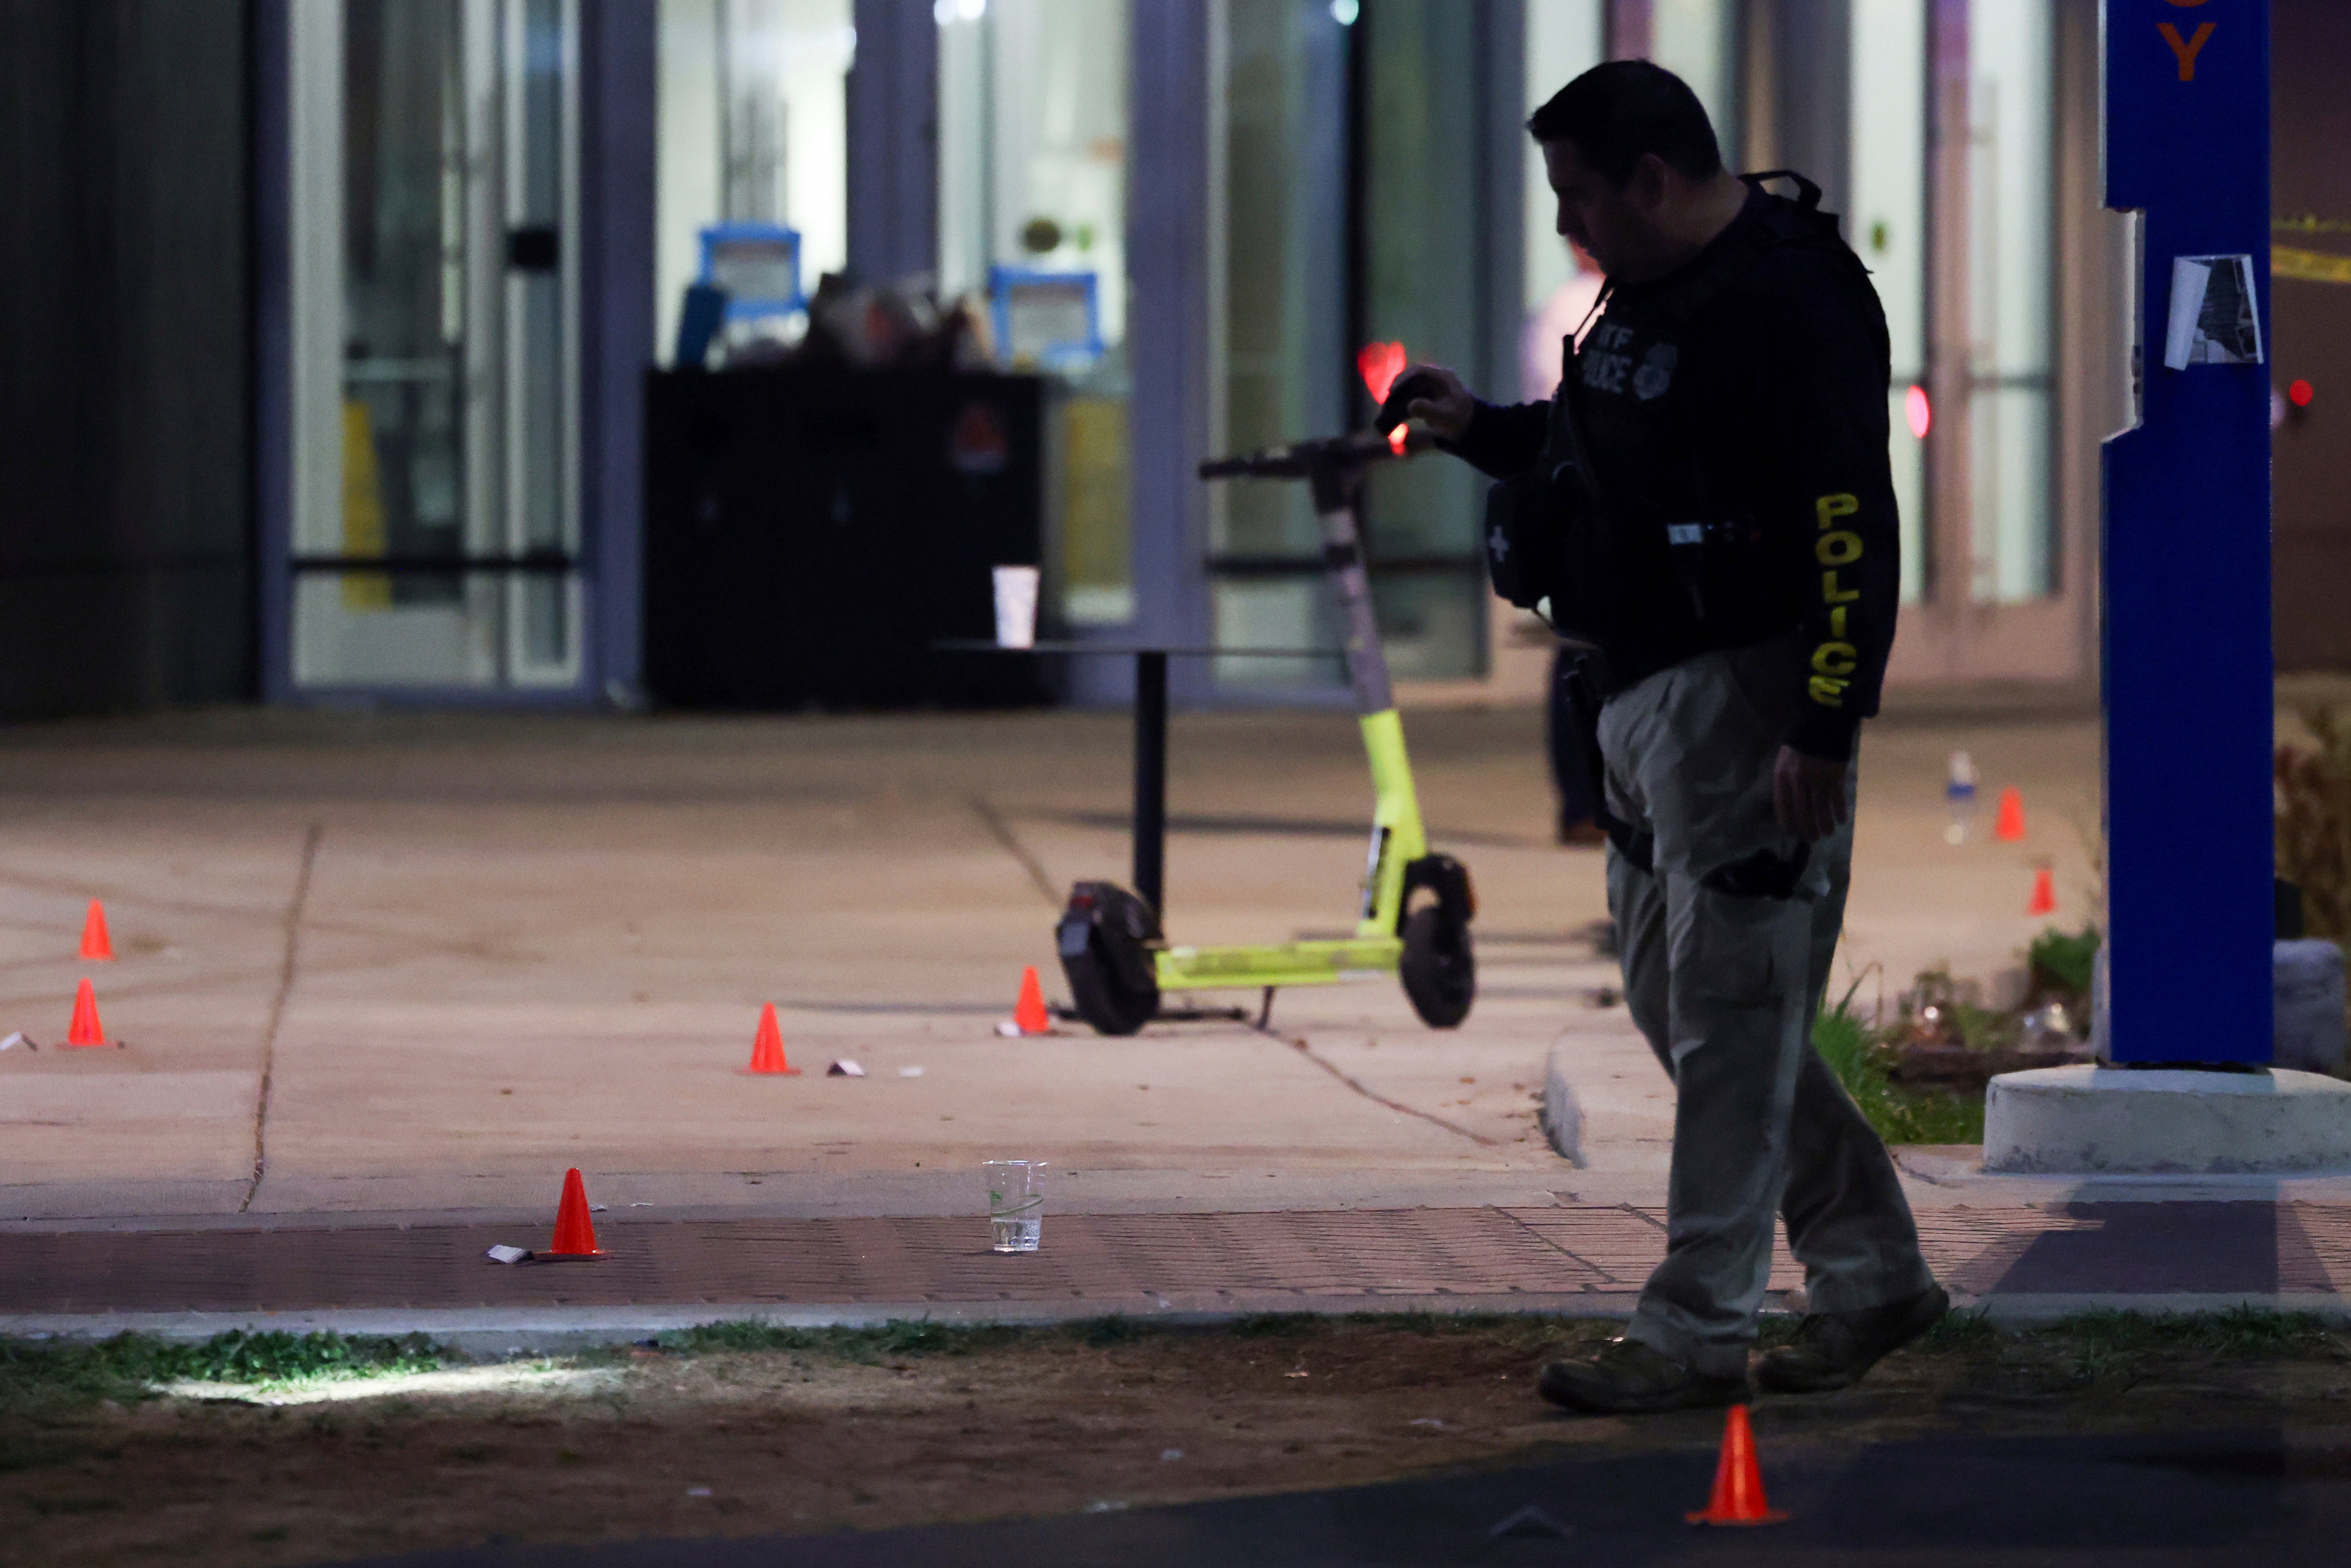 A police officer searches for evidence in front of a building at Morgan State Universit